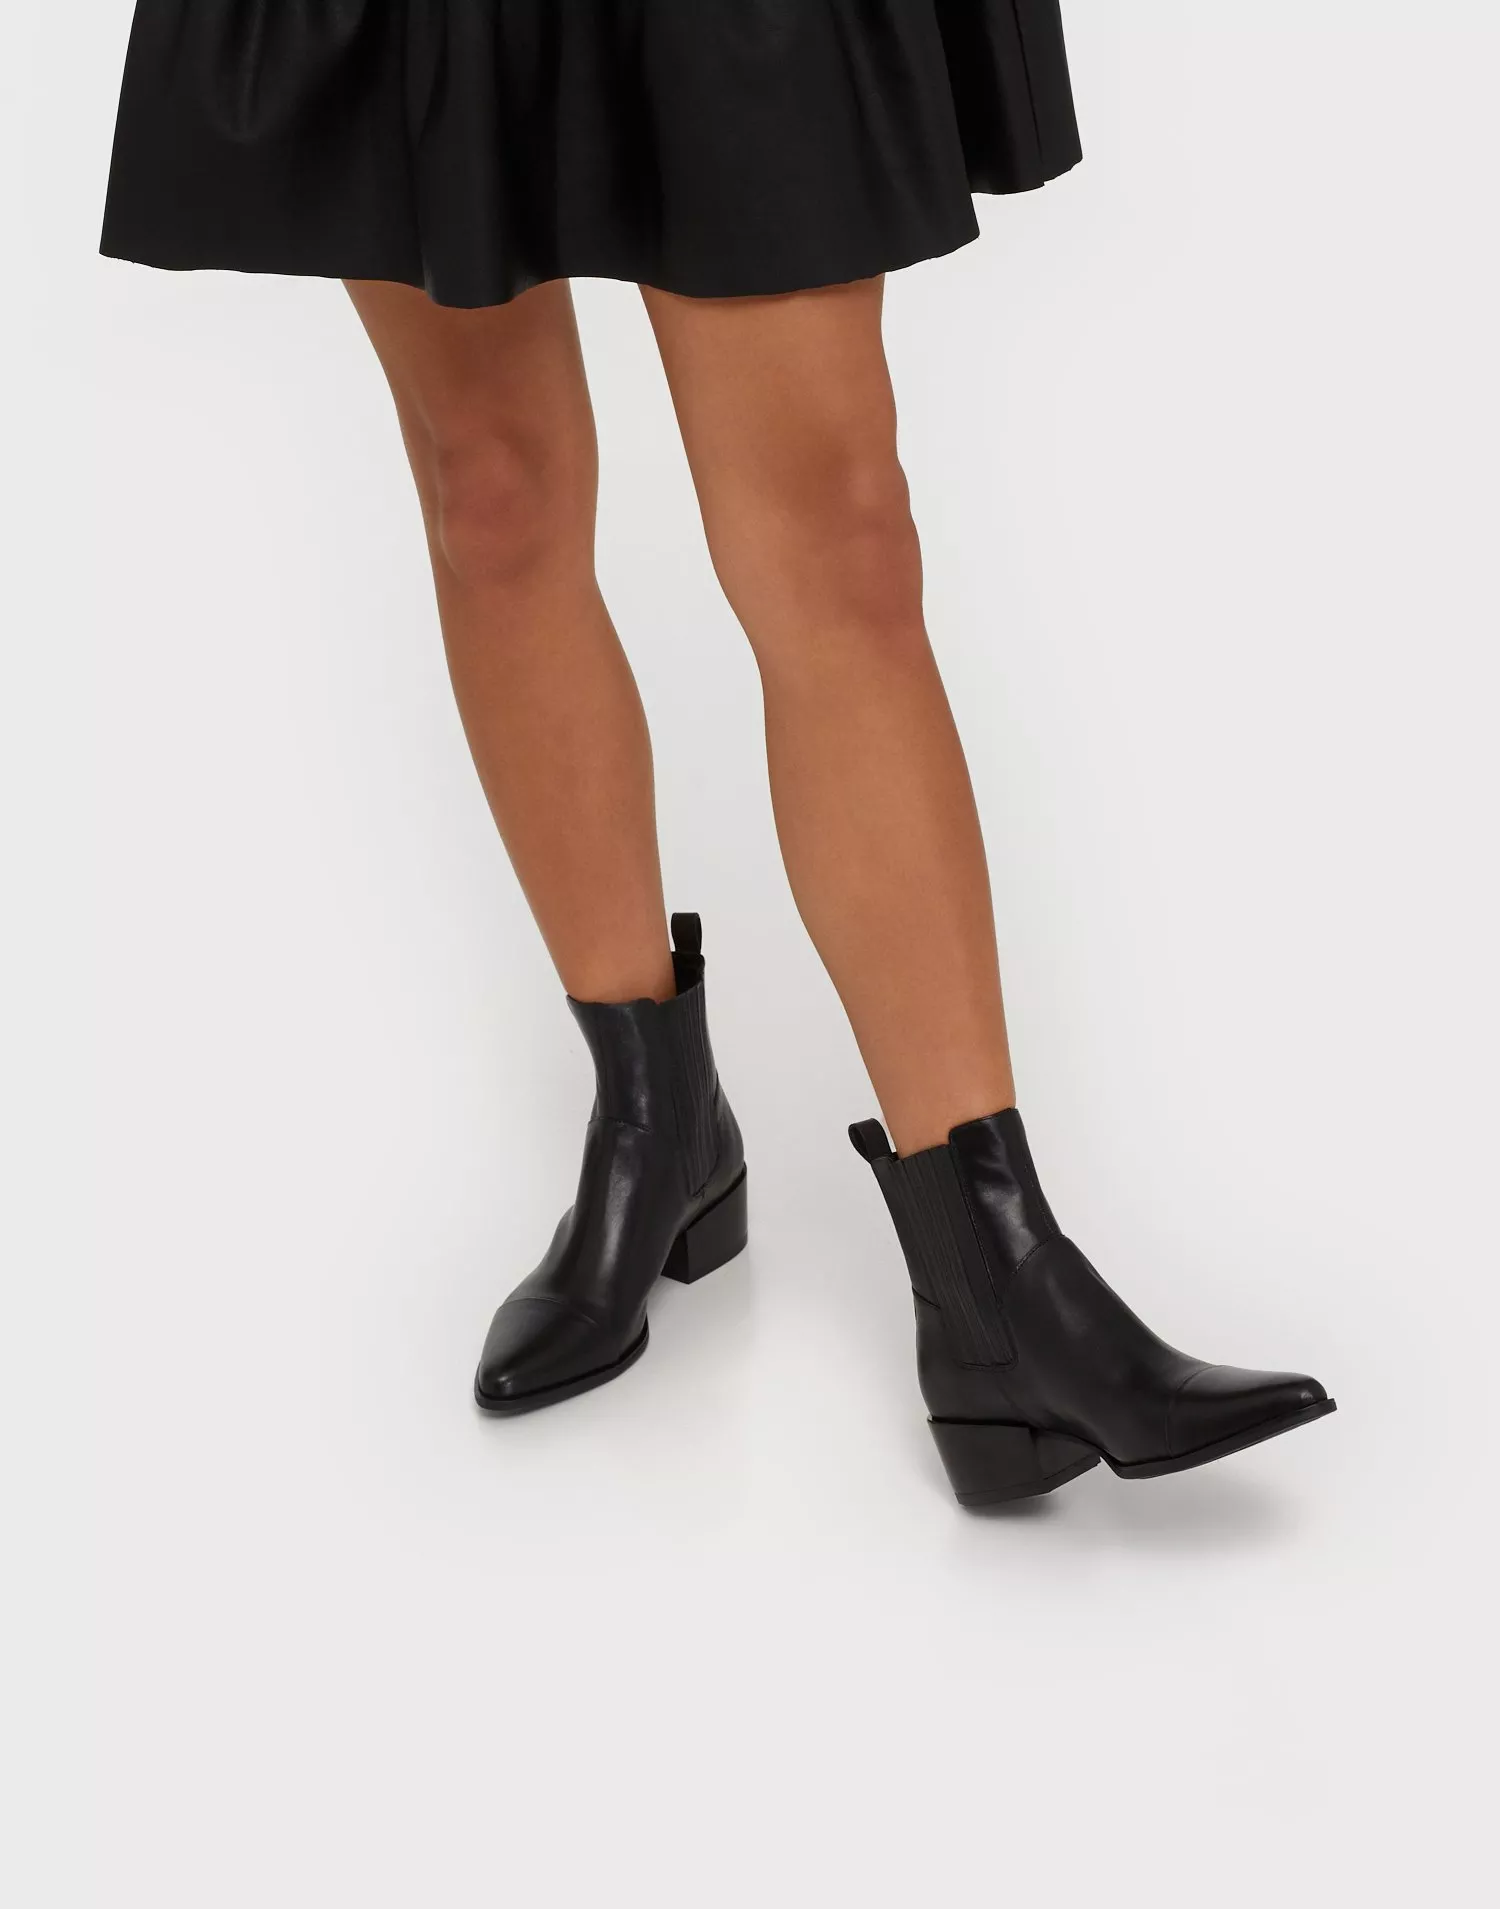 Western Boots - Black | Nelly.com